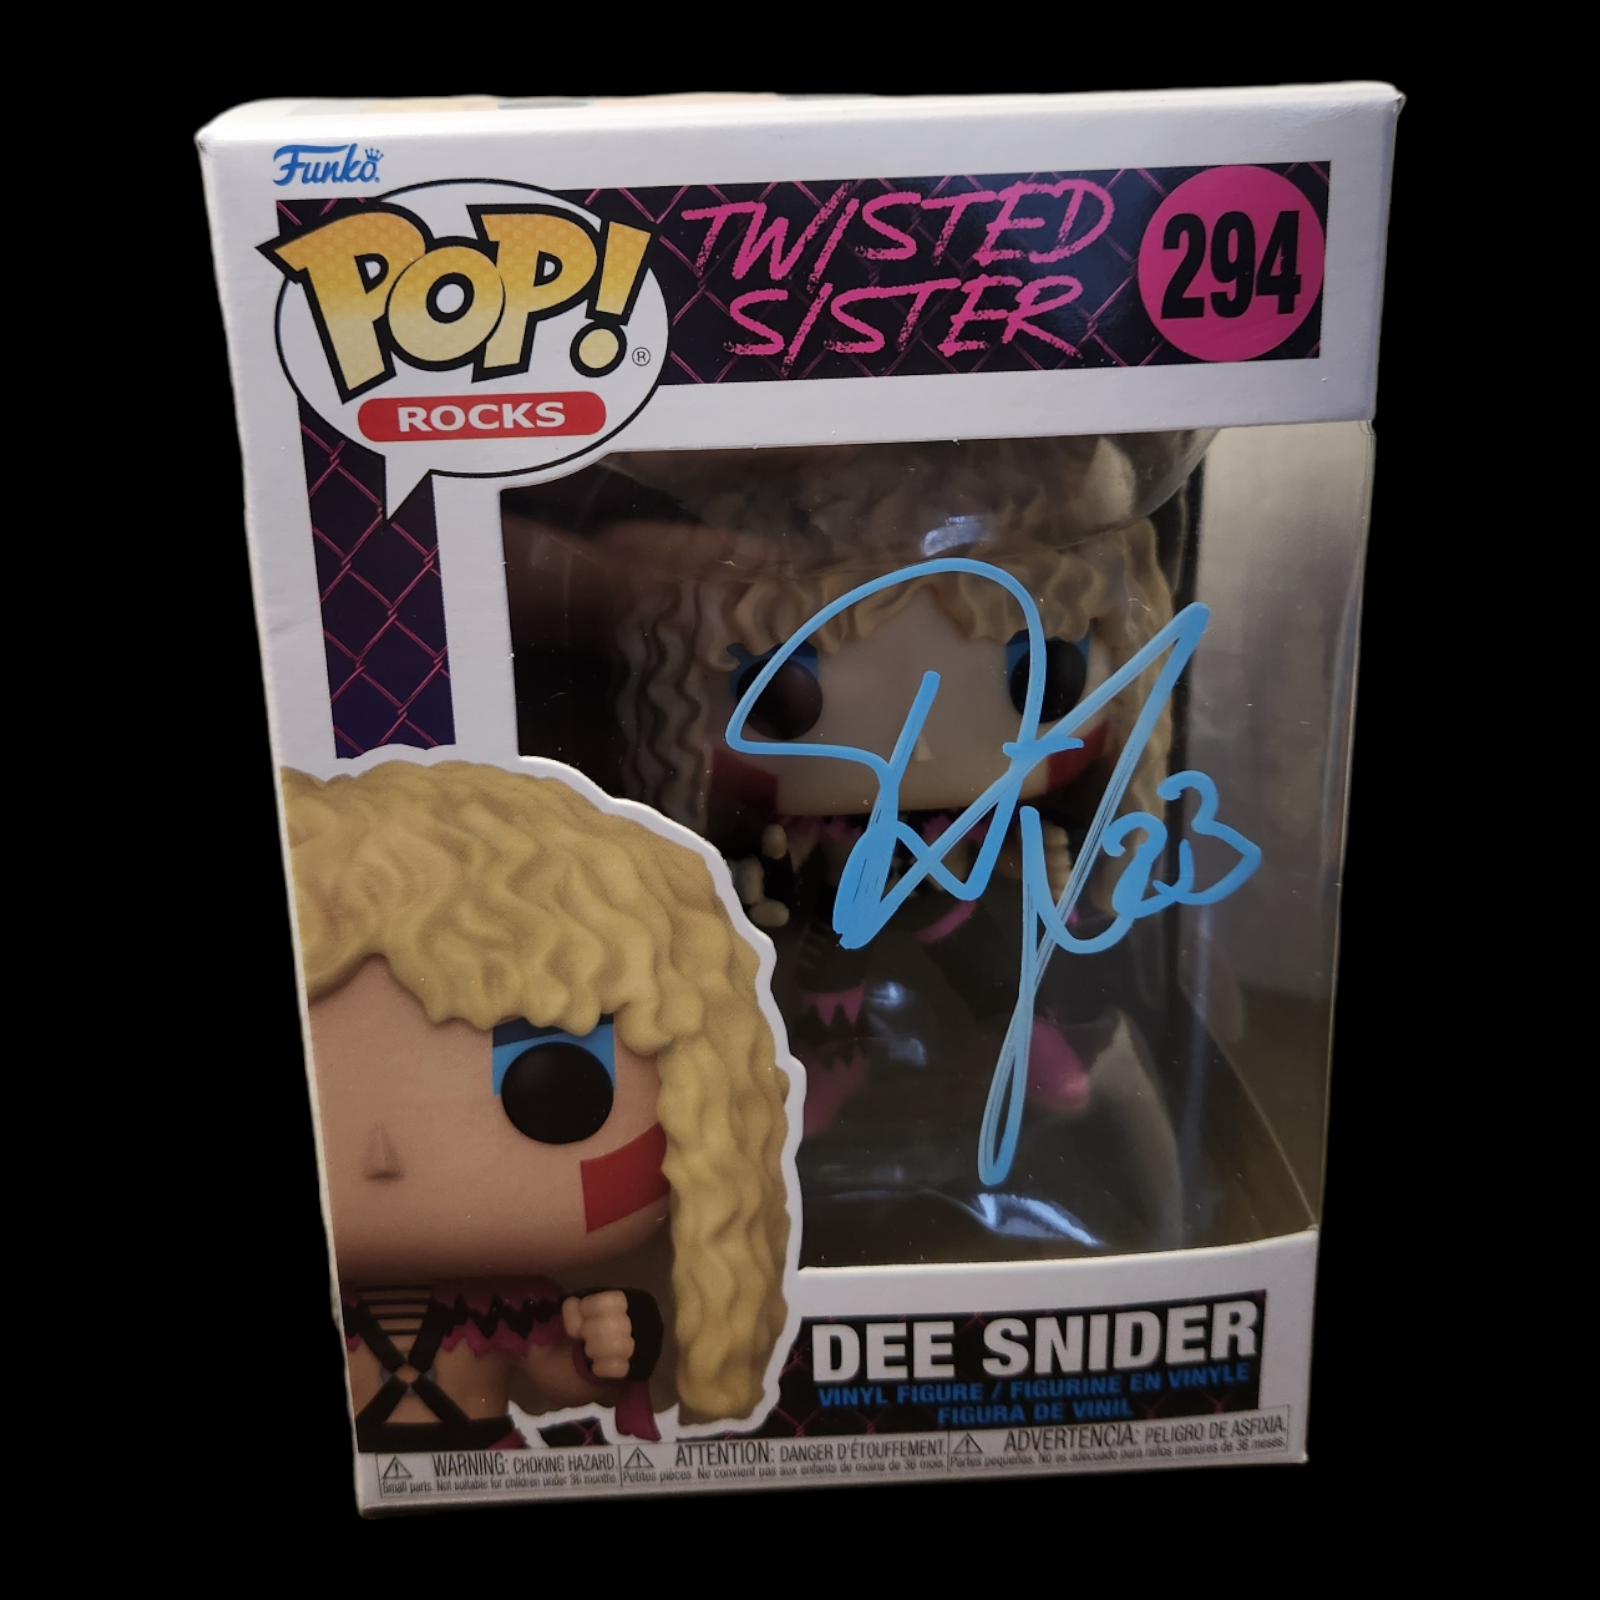 Signed Pop by Dee Snider of Twisted Sister!